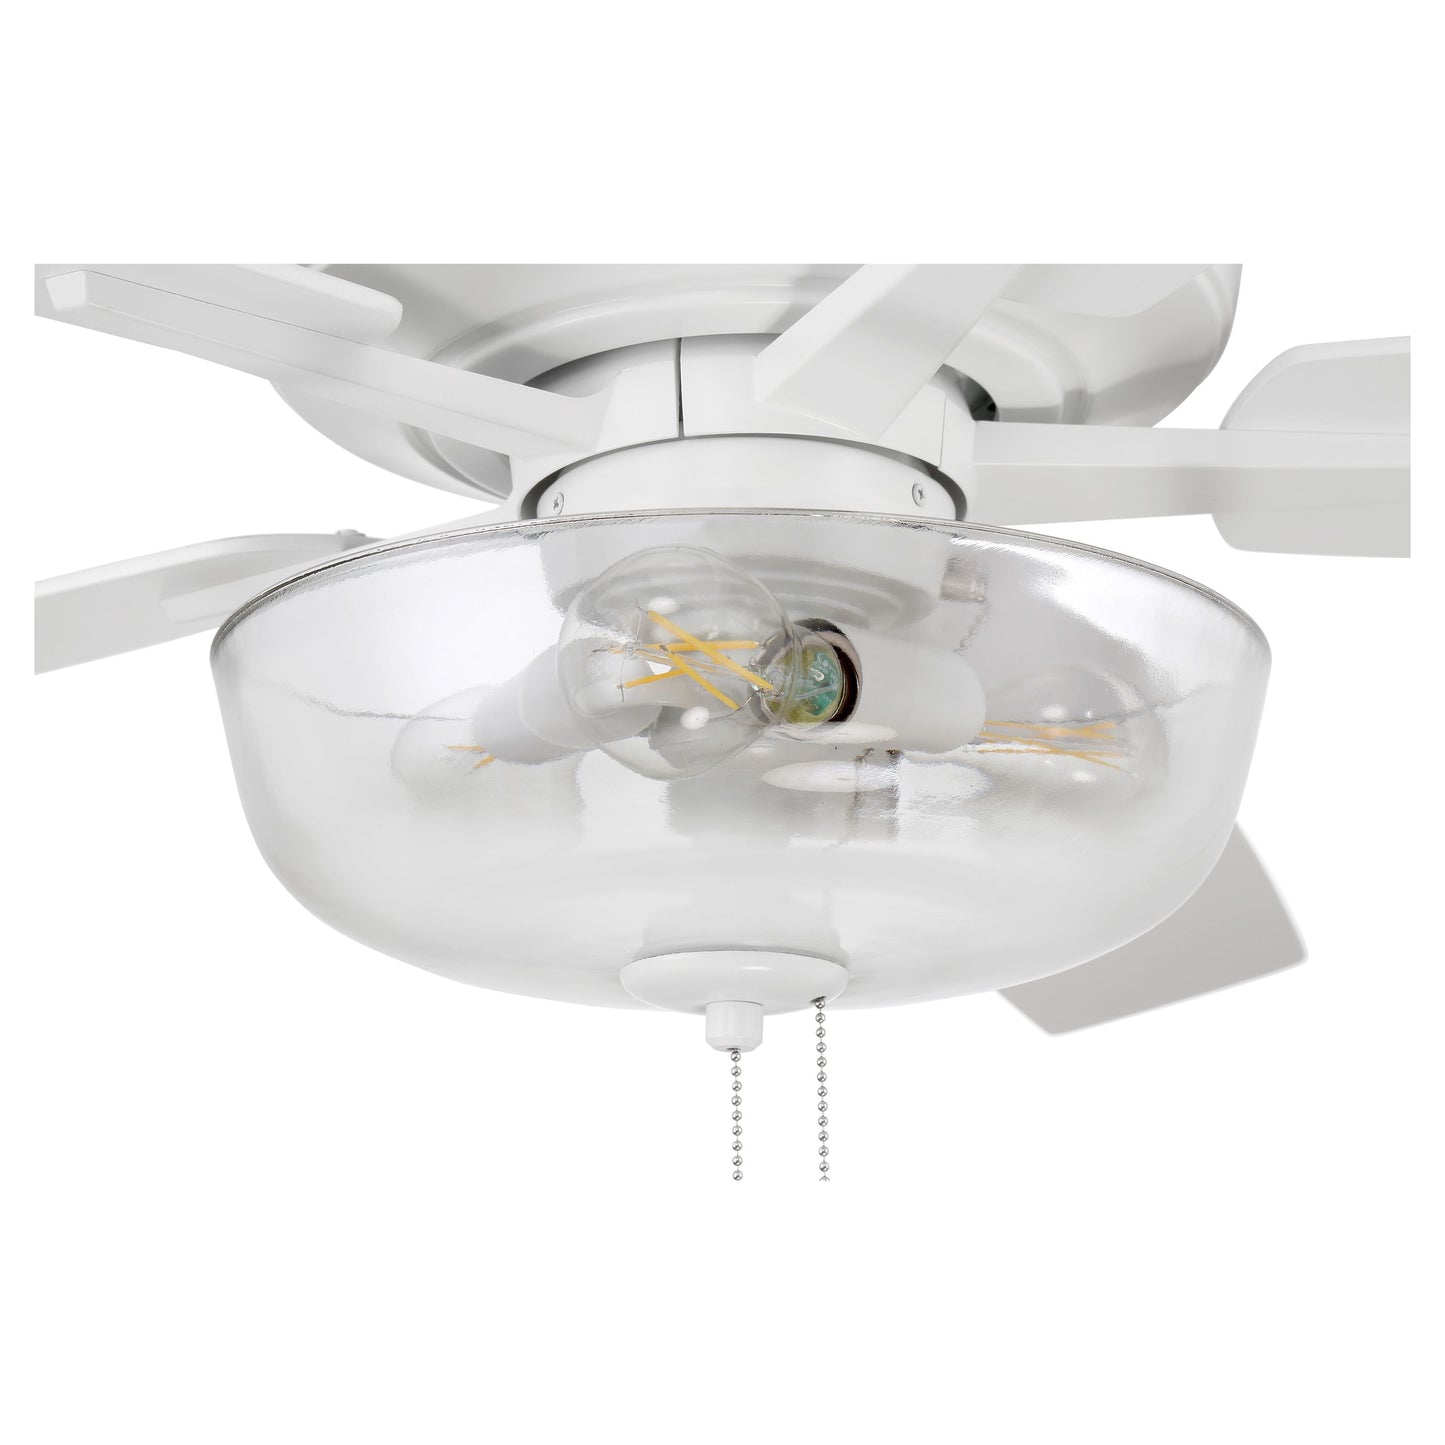 S101W5-60WWOK - Super Pro 101 60" 5 Blade Ceiling Fan with Light Kit - Pull Chain - White